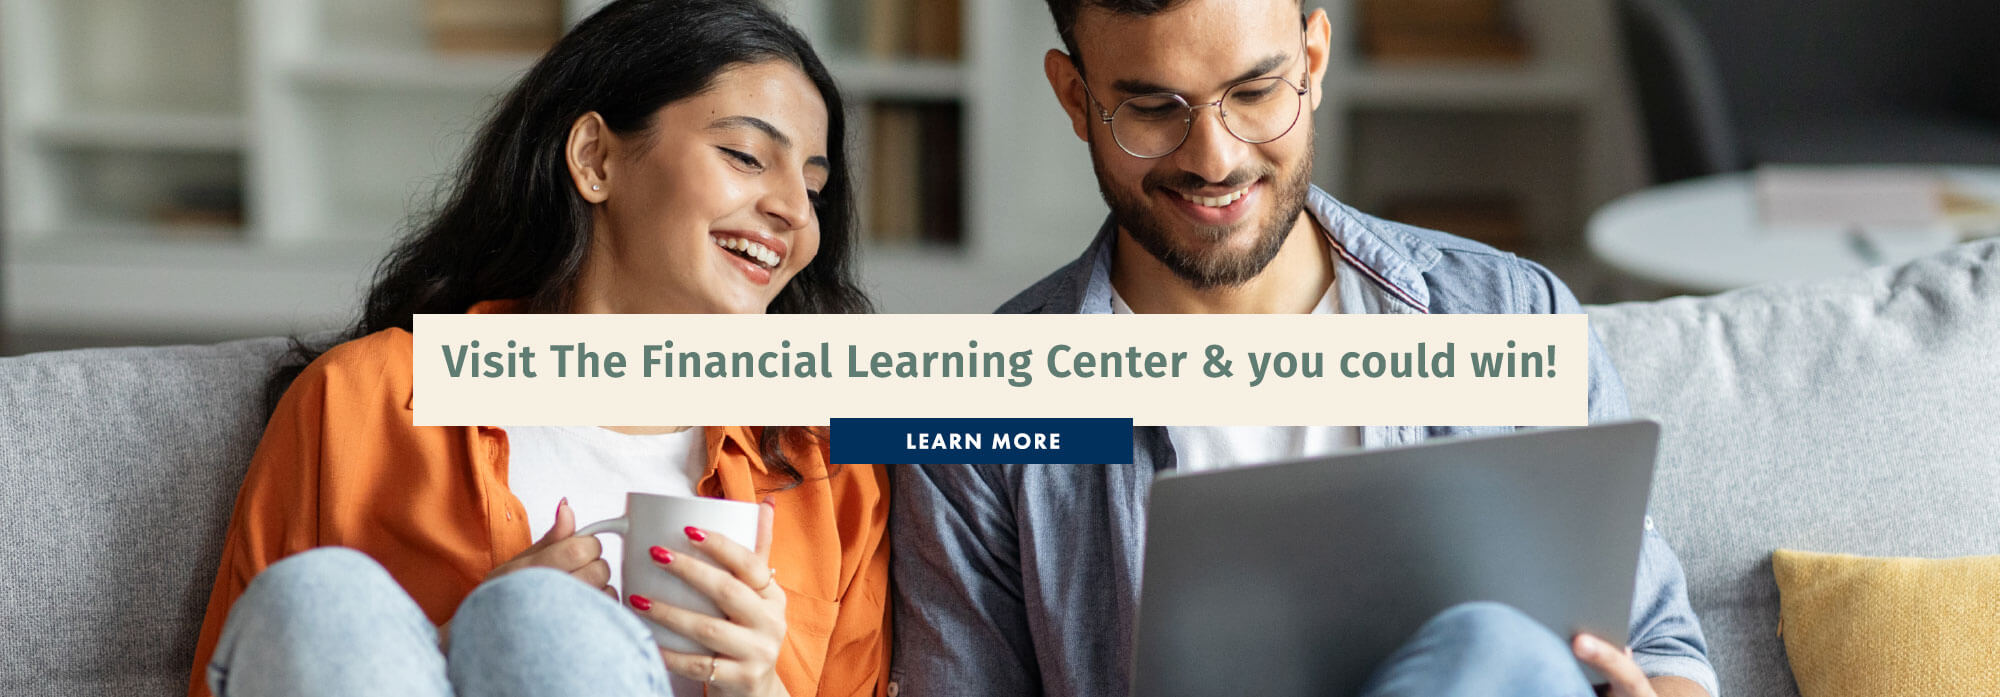 Visit The Financial Learning Center & you could win!